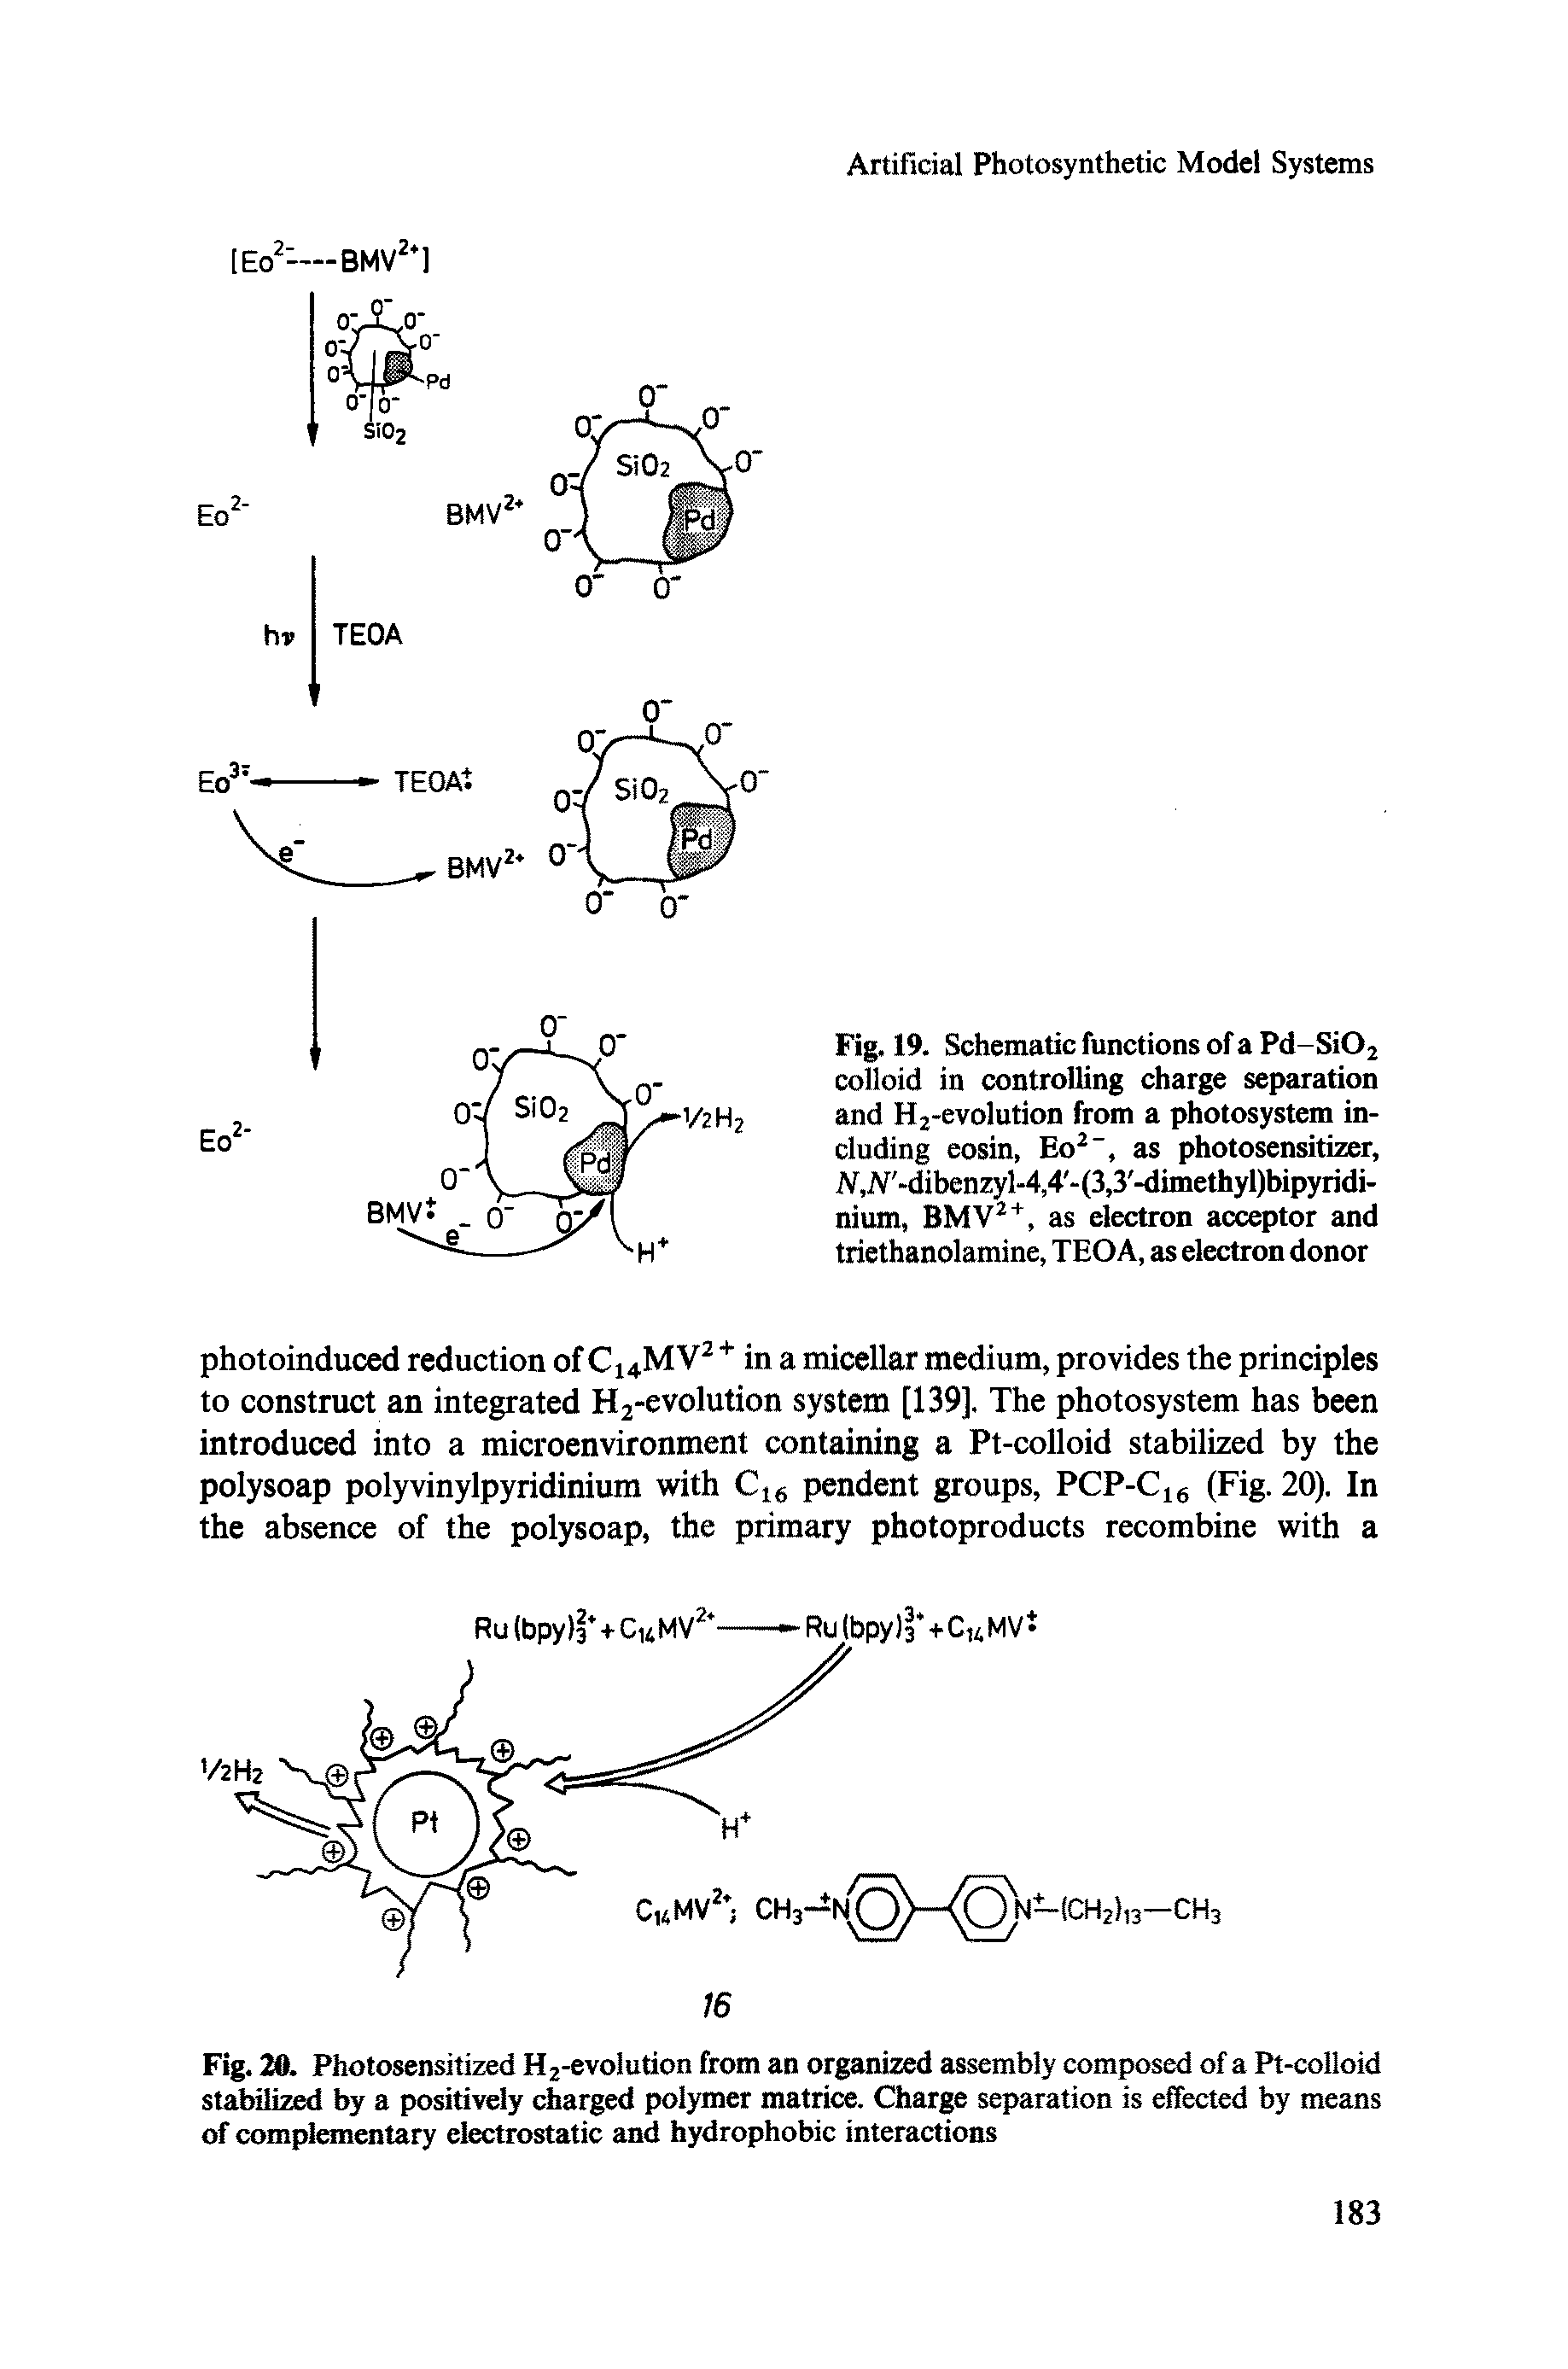 Fig. 19. Schematic functions of a Pd-Si02 colloid in controlling charge separation and Hrevolution from a photosystem including eosin, Eo2-, as photosensitizer, iV,JV -dibenzyl-4,4 -(3,3 -dimethyl)bipyridi-nium, BMV2+, as electron acceptor and triethanolamine, TEOA, as electron donor...